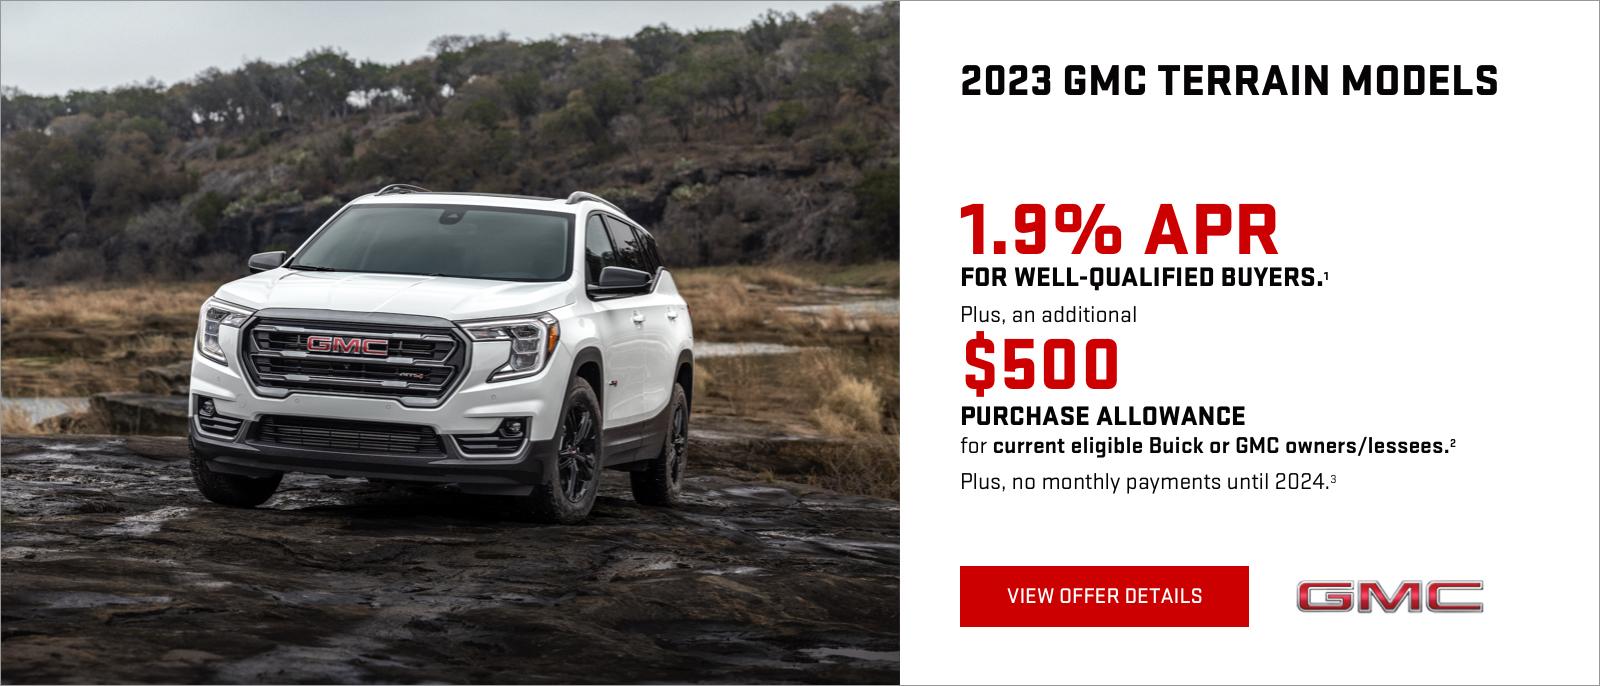 1.9% APR for well-qualified buyers.1

Plus, an additional $500 PURCHASE ALLOWANCE for current eligible Buick or GMC owners/lessees.2

PLUS, NO MONTHLY PAYMENTS UNTIL 2024. 3